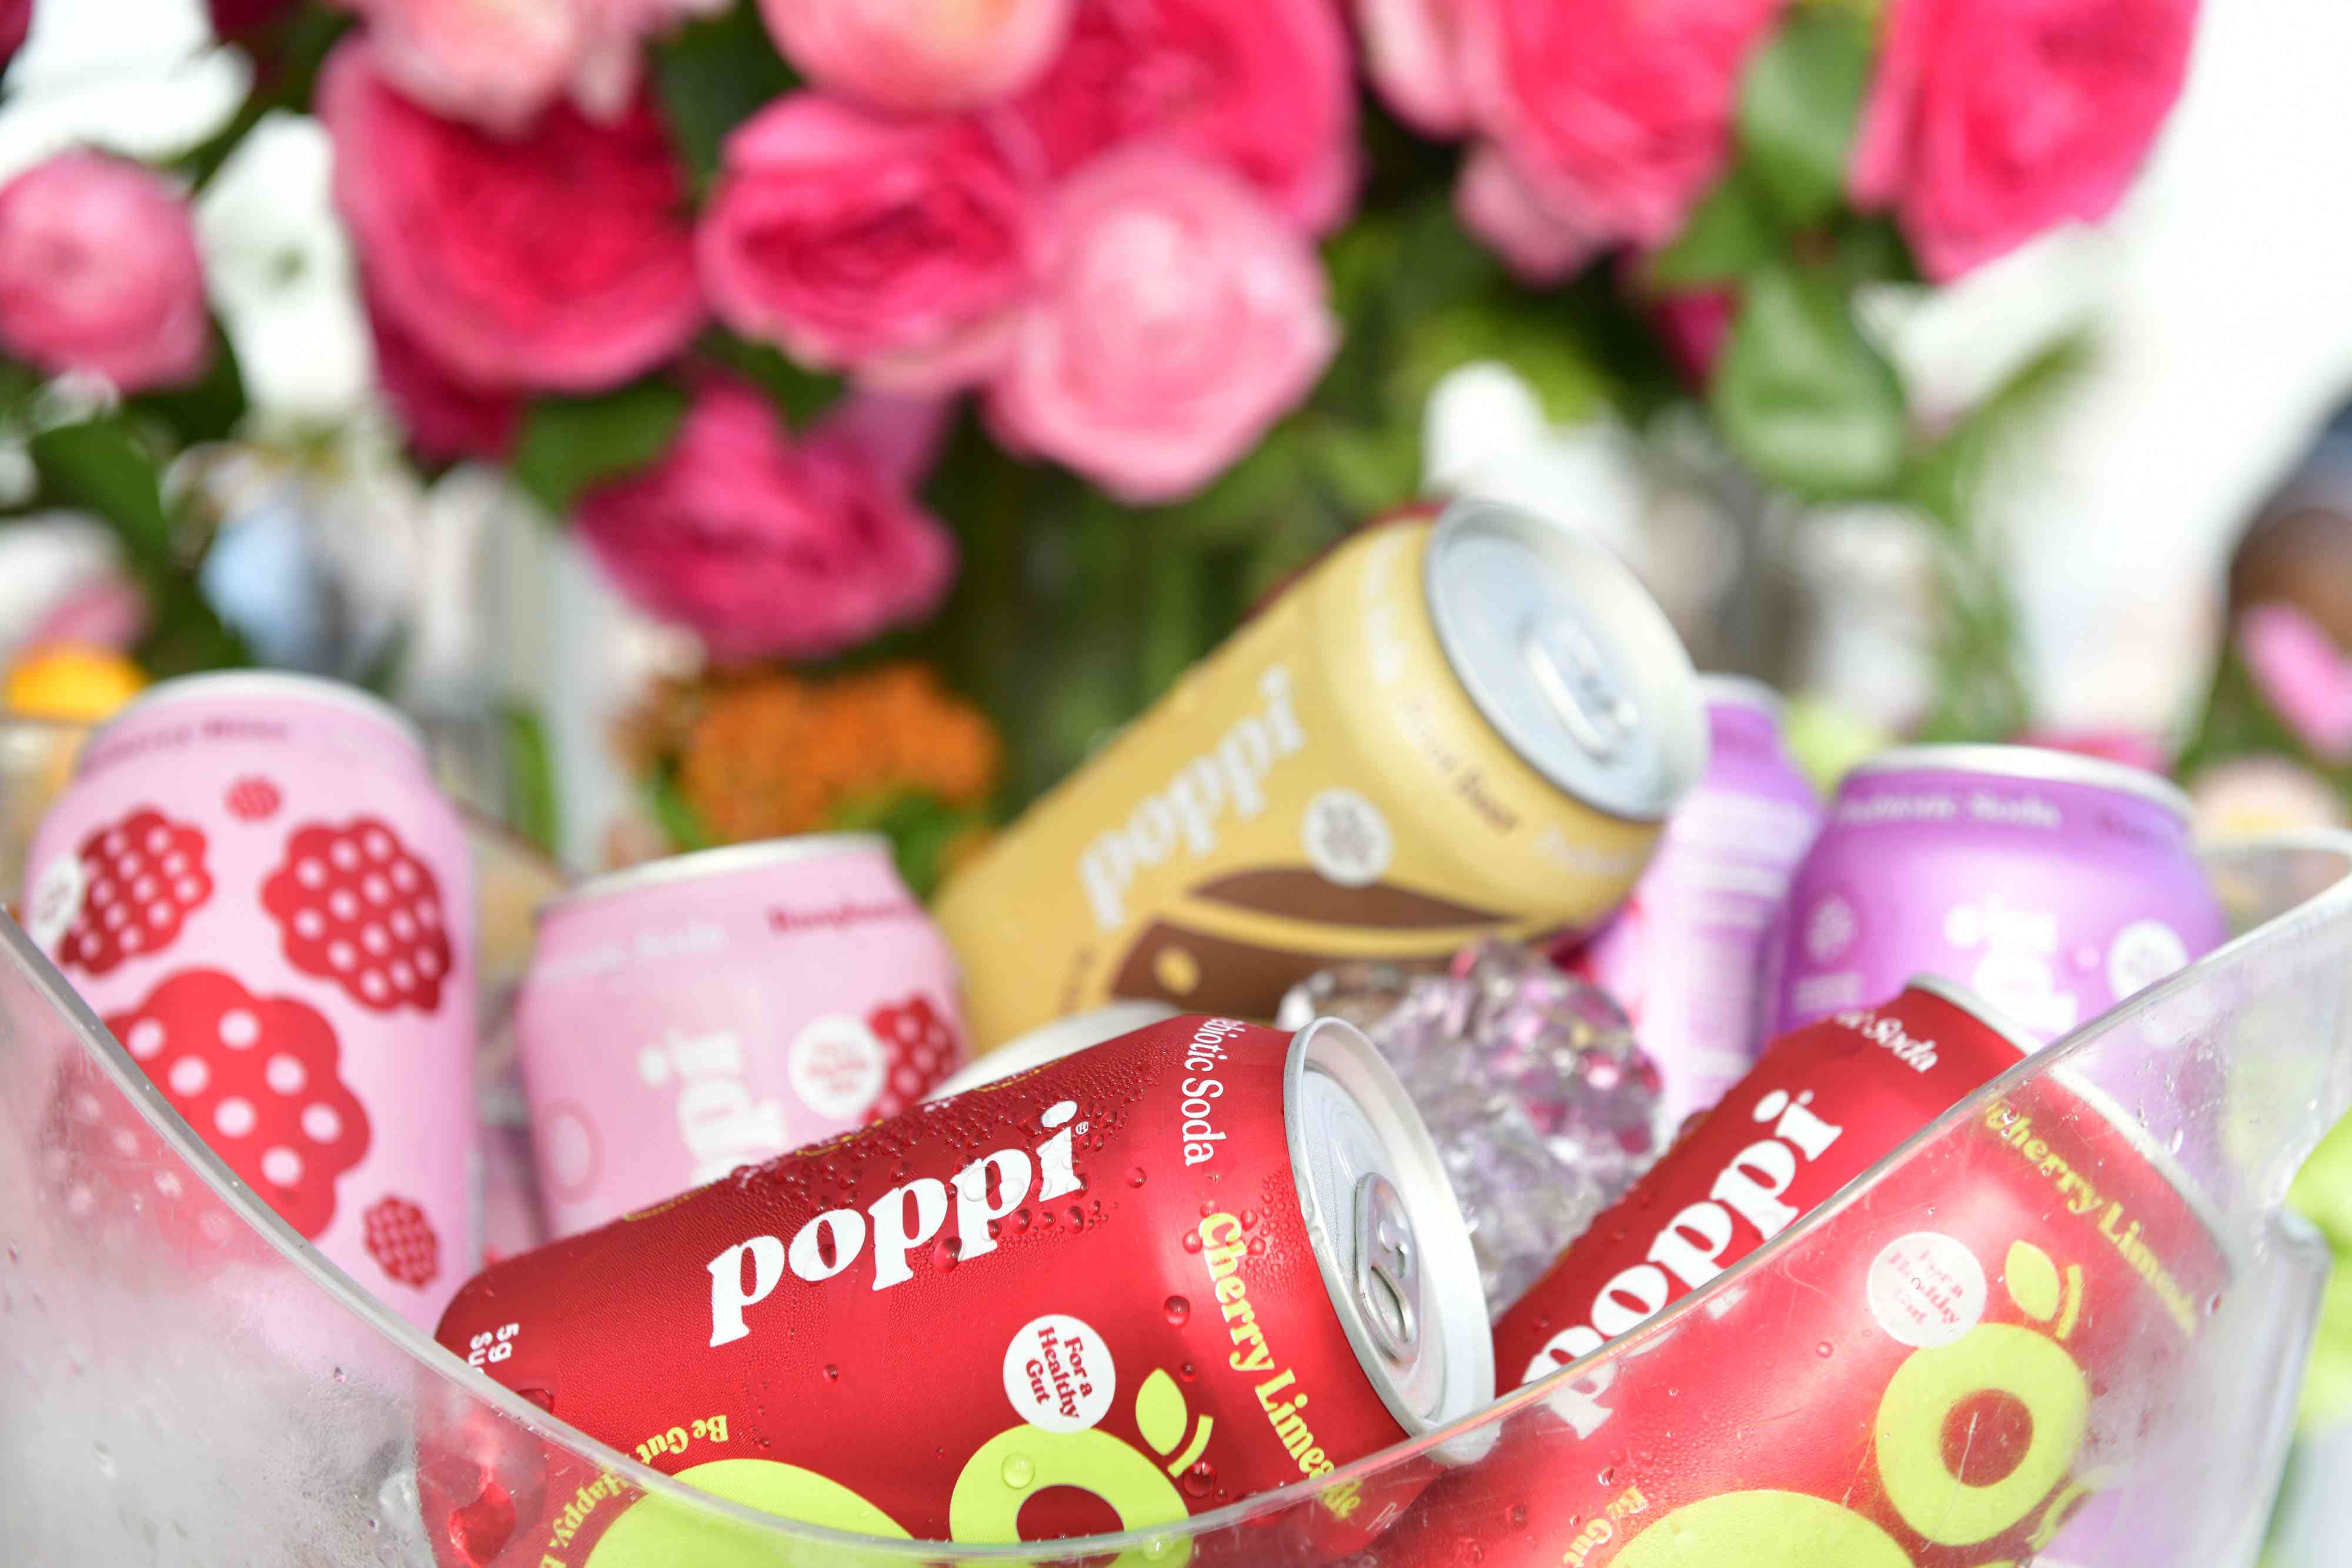 Should You Keep Drinking Poppi? What to Know About a Lawsuit Against the Soda